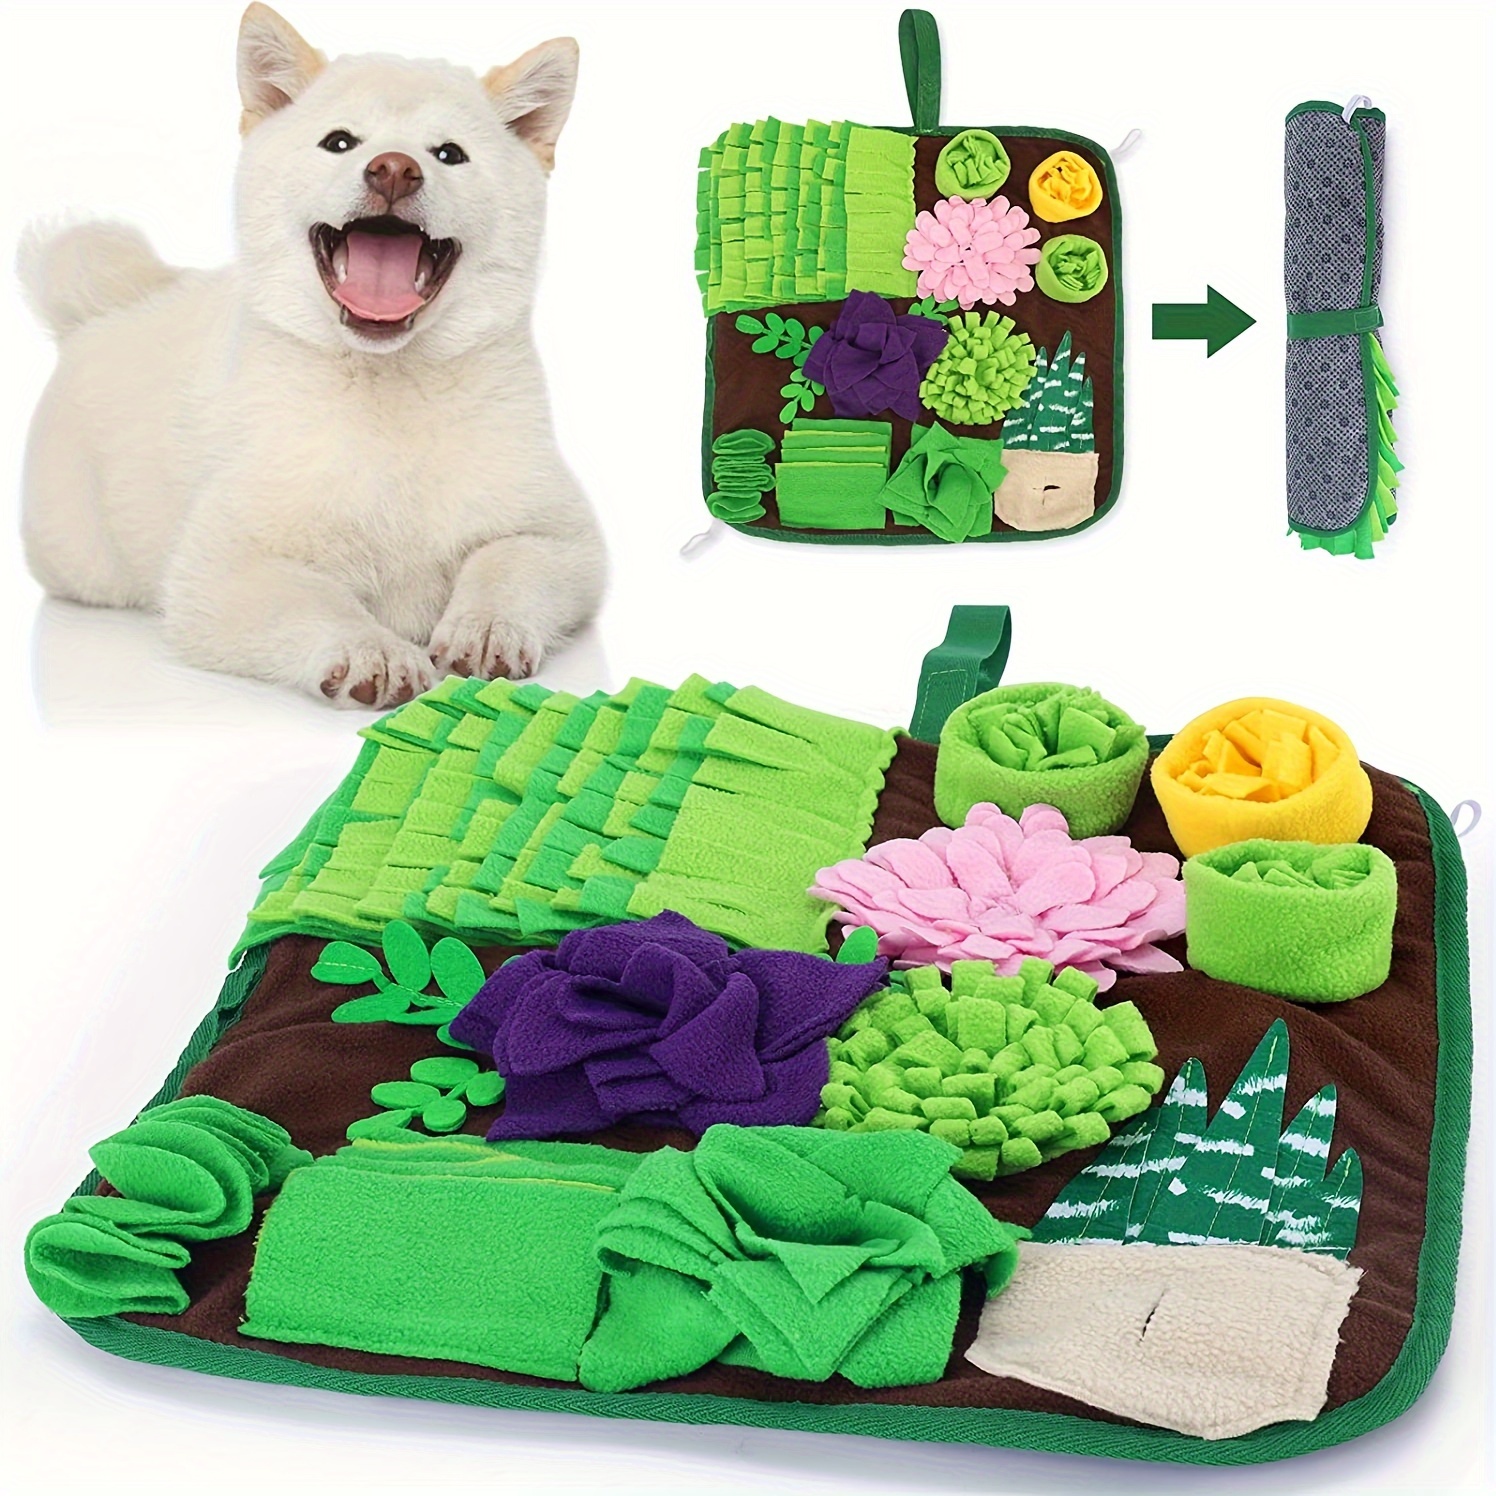 

Interactive Snuffle Mat For Dogs - Engaging Nosework Training Blanket, Anti-choke Slow Feeder Pad, Durable Polyester Material